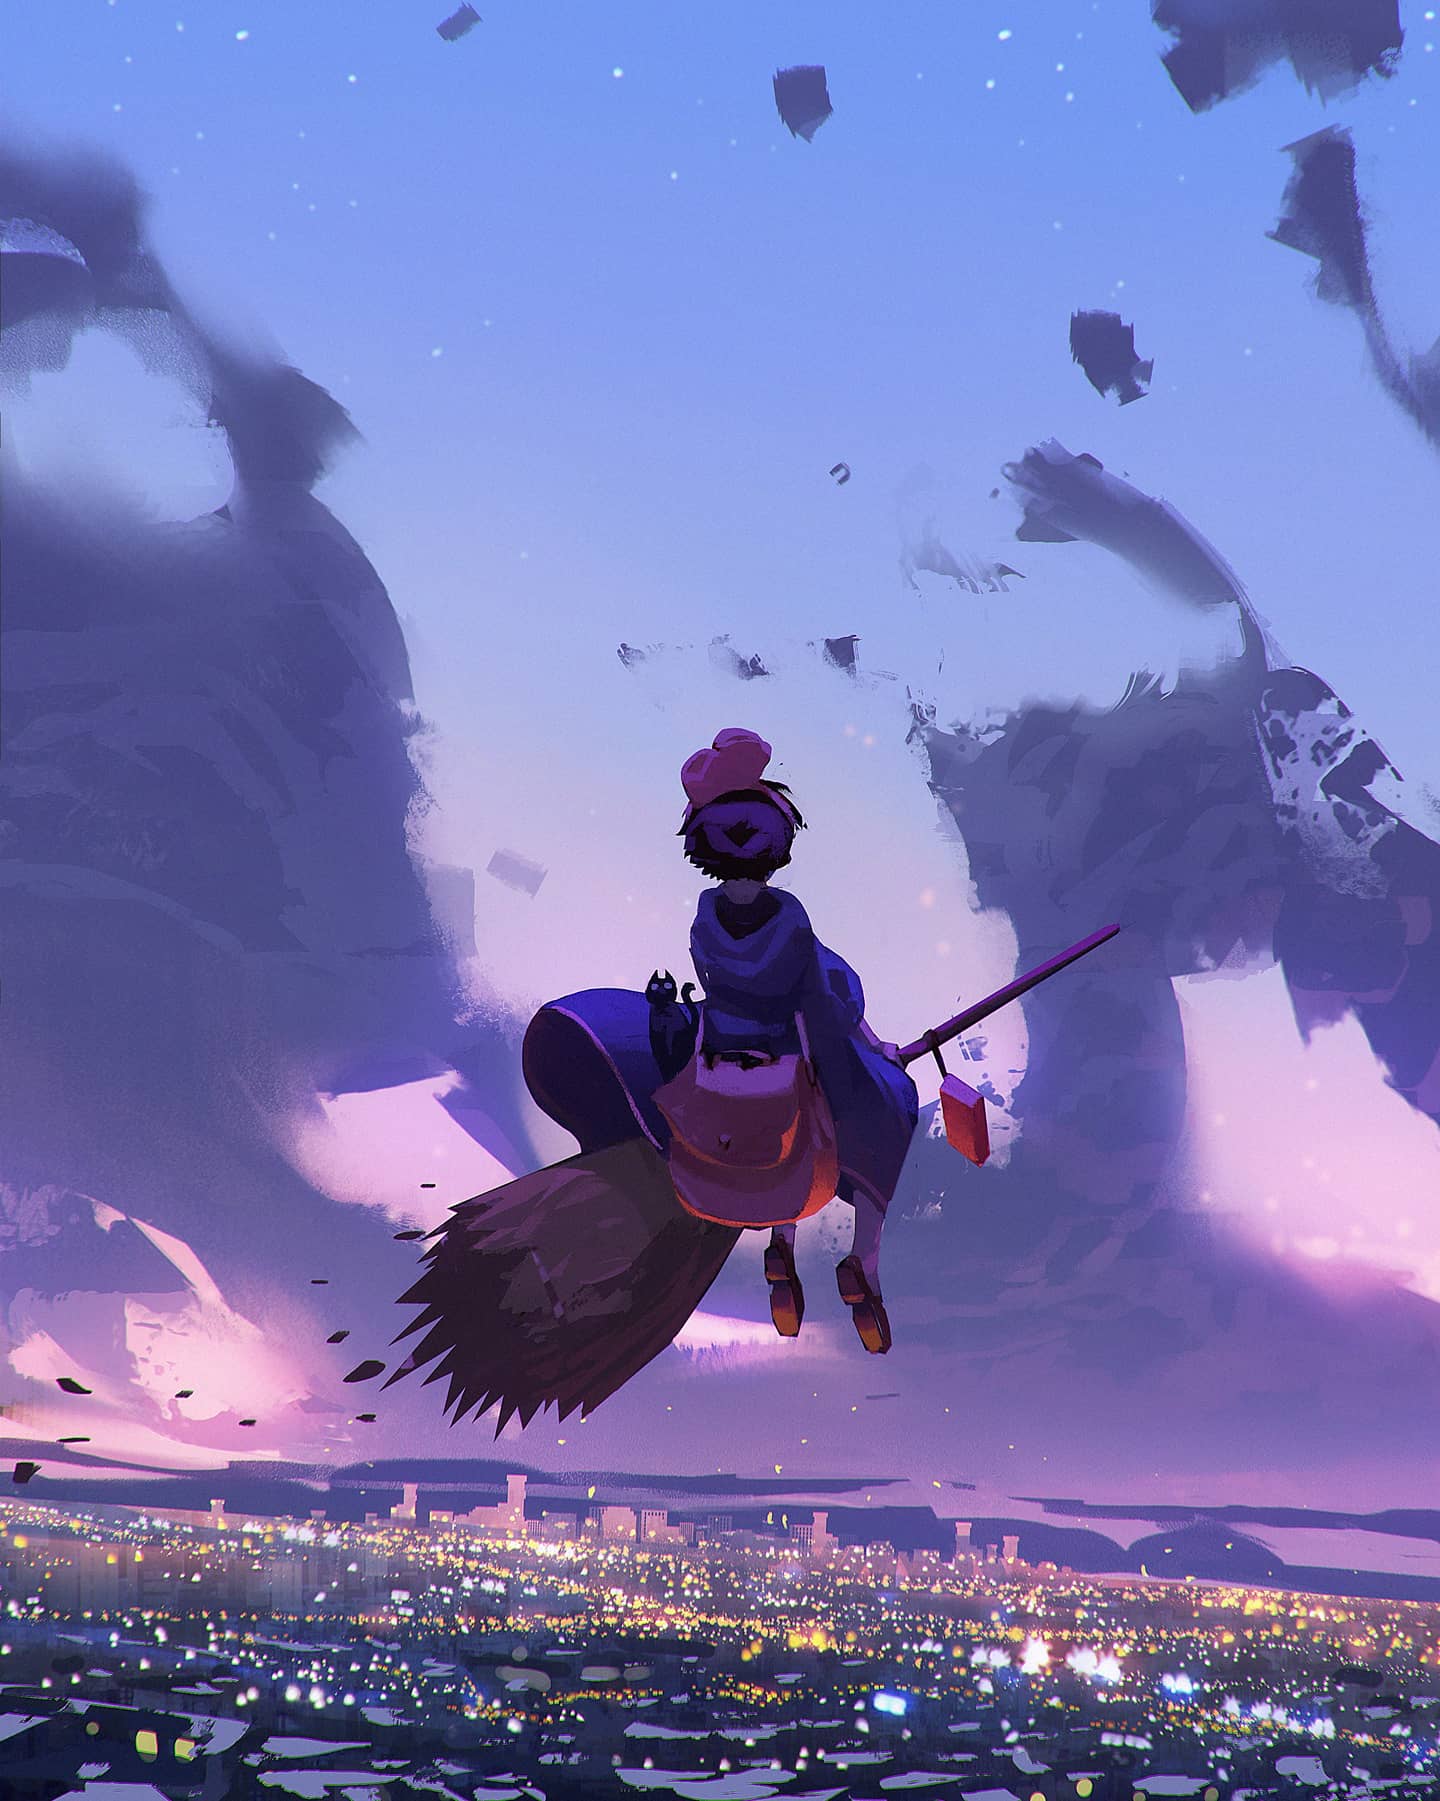 Anime 1440x1801 Kiki's Delivery Service sky clouds illustration broom witch witch's broom anime girls cityscape